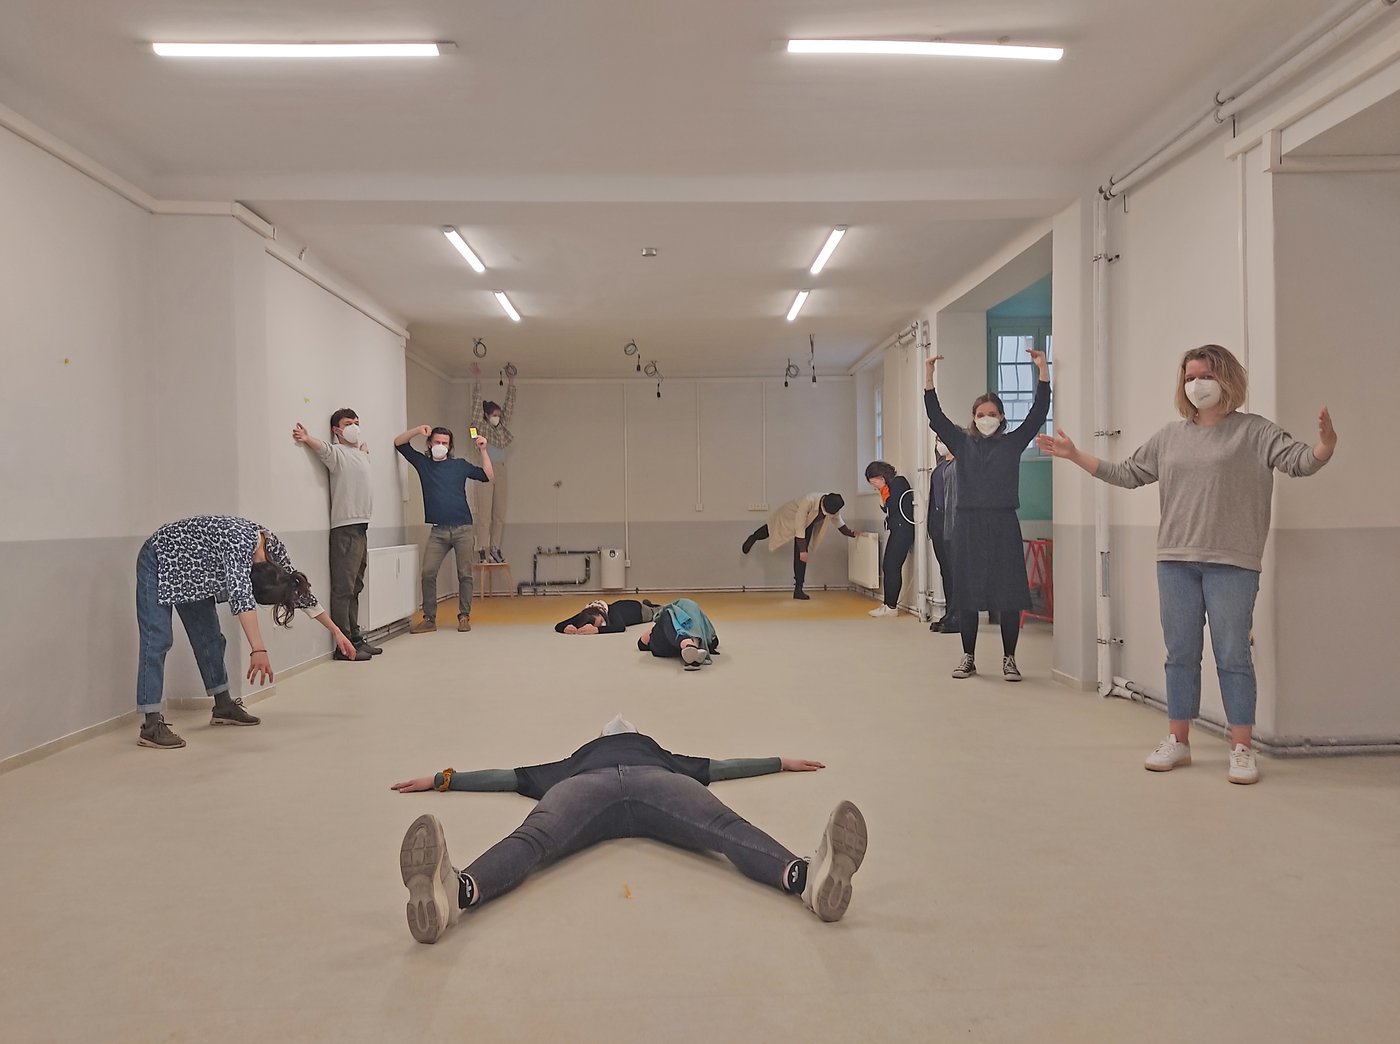 The exhibition shows master projects developed in the course Artistic Practice / Artistic Art Education Practice by Isa Rosenberger at the Institute for Education in the Arts at the Academy of Fine Arts Vienna.